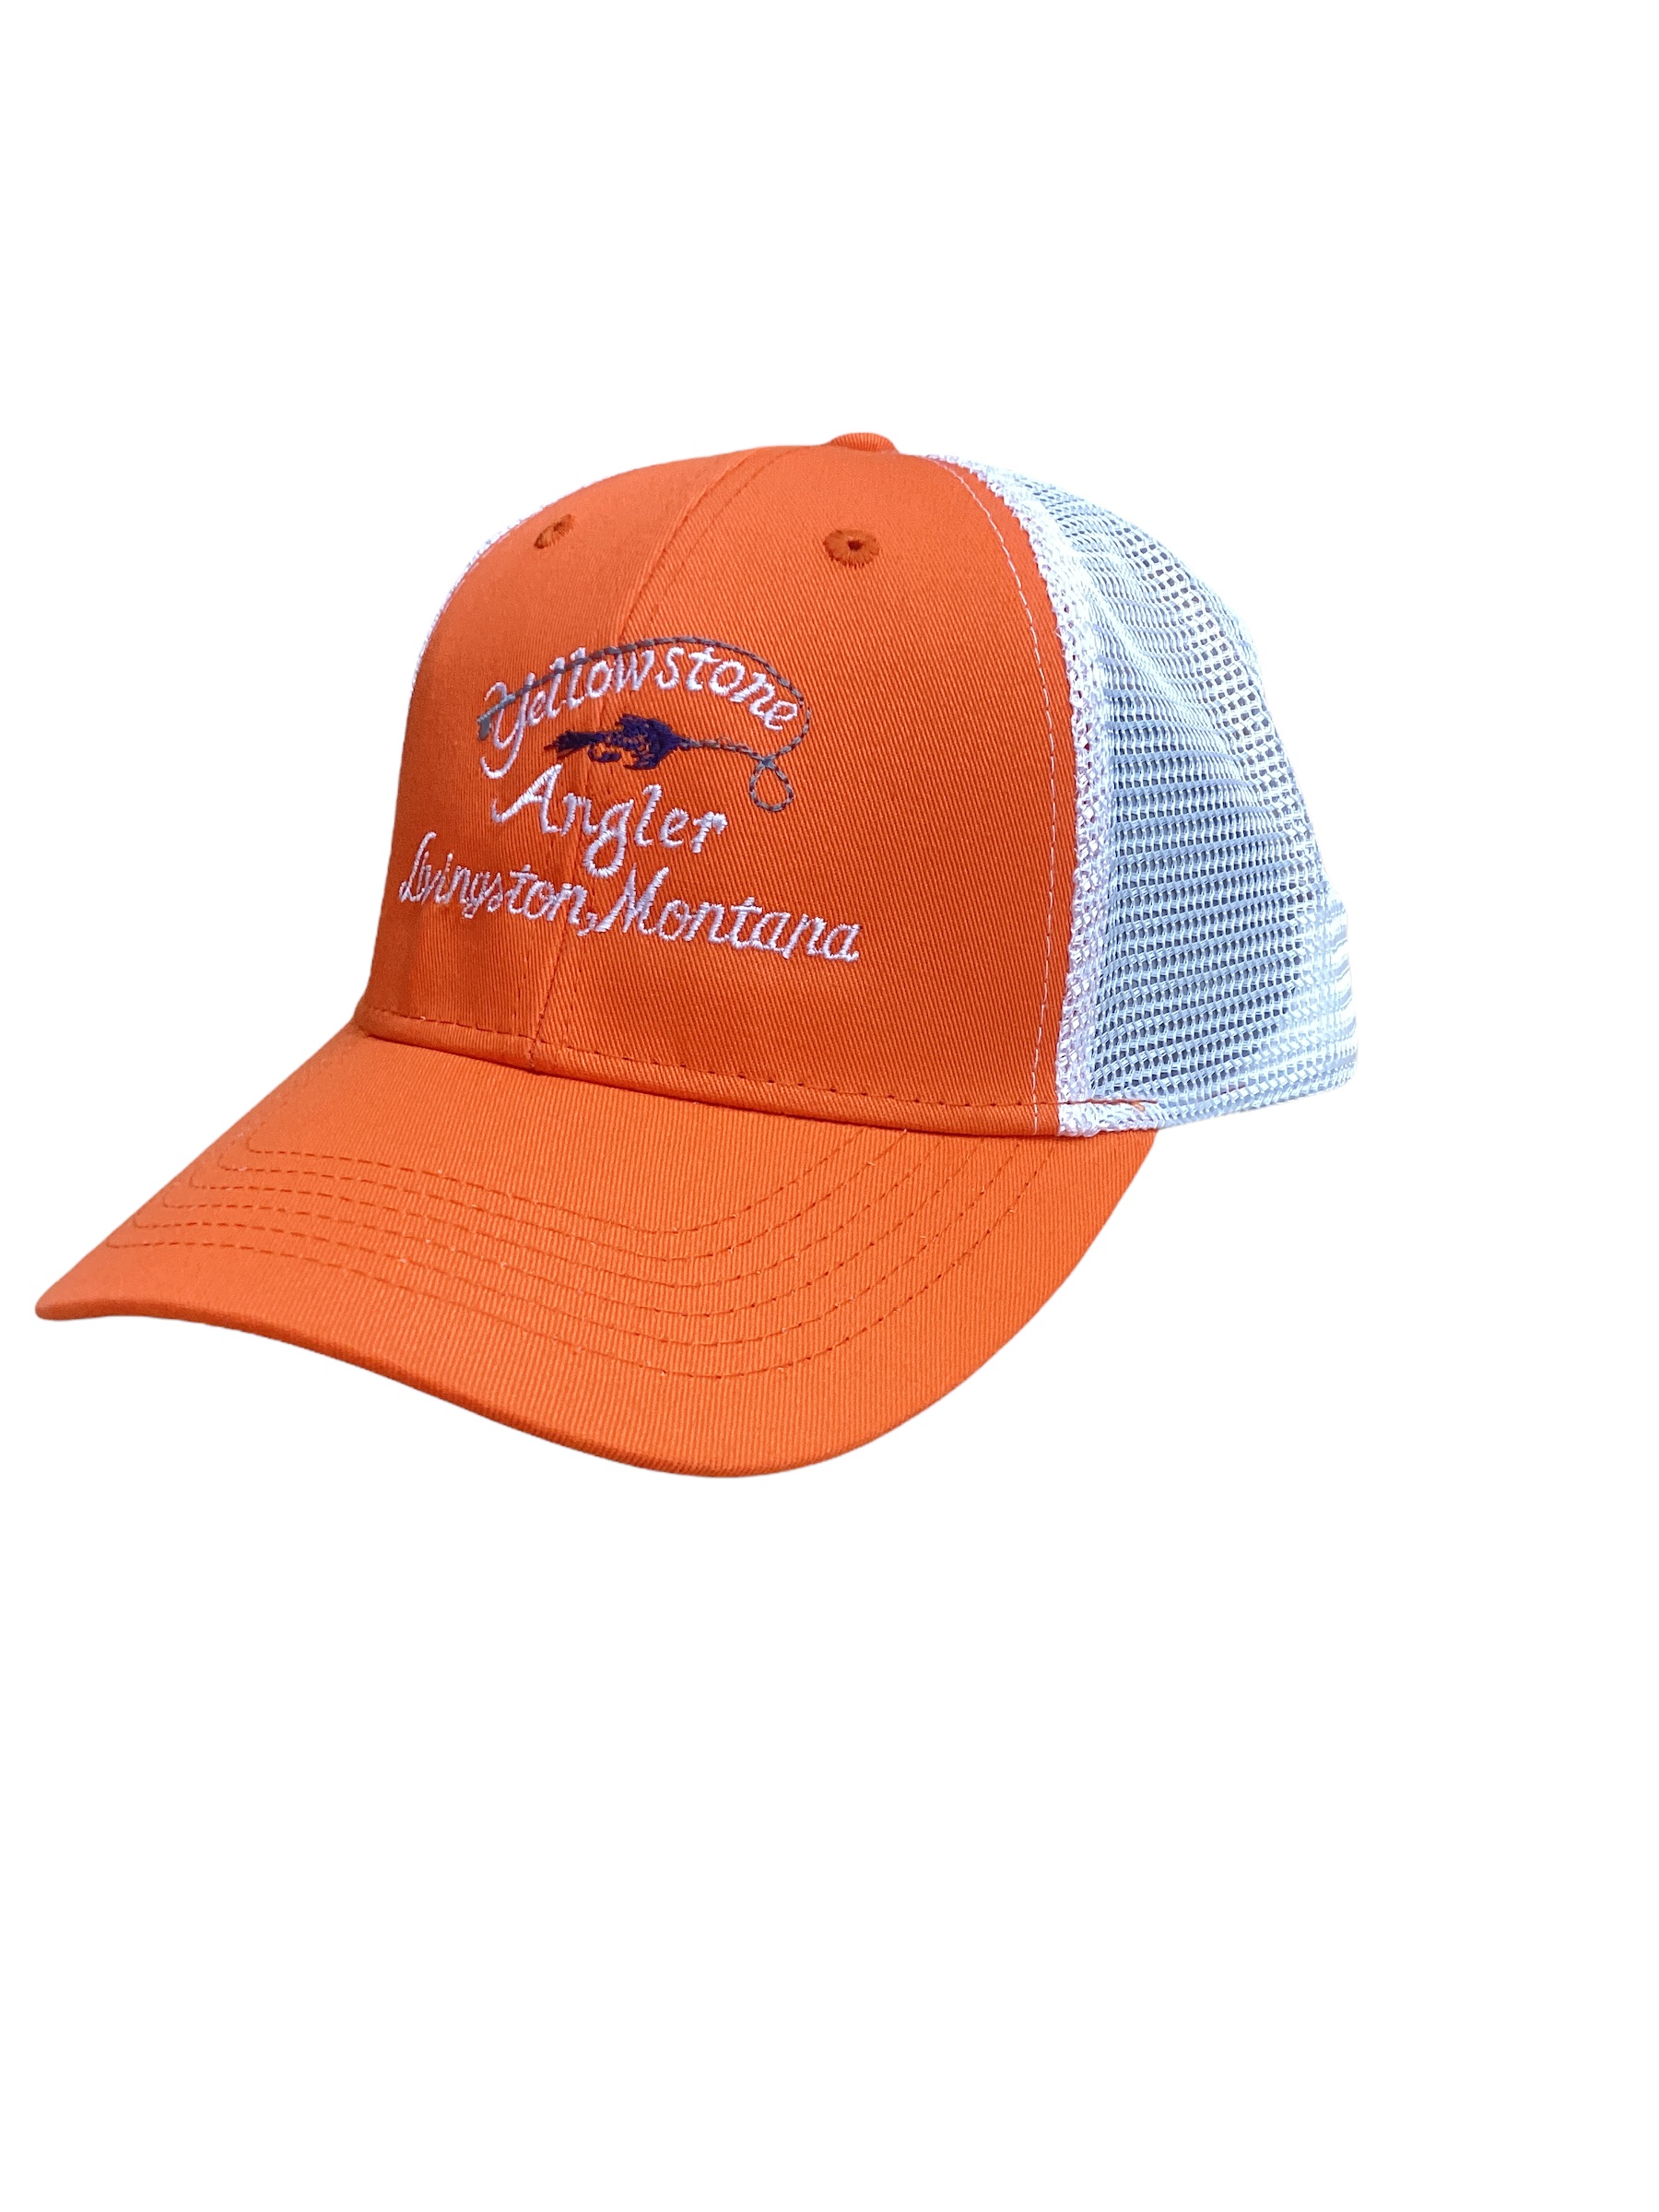 Inventory Shop Online Gear Angler For Fishing » Fly Yellowstone »